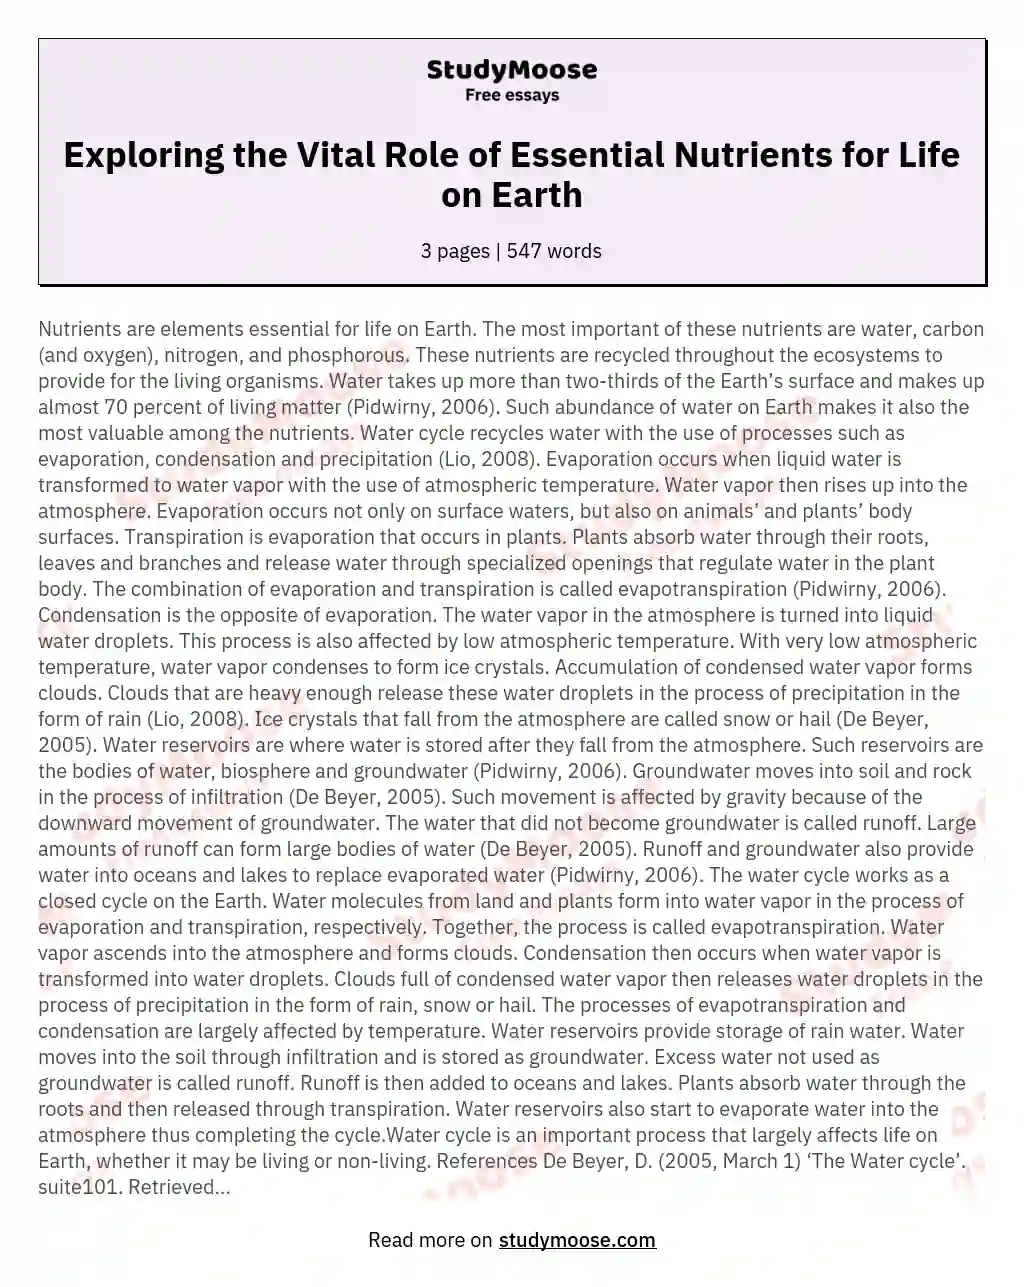 Exploring the Vital Role of Essential Nutrients for Life on Earth essay